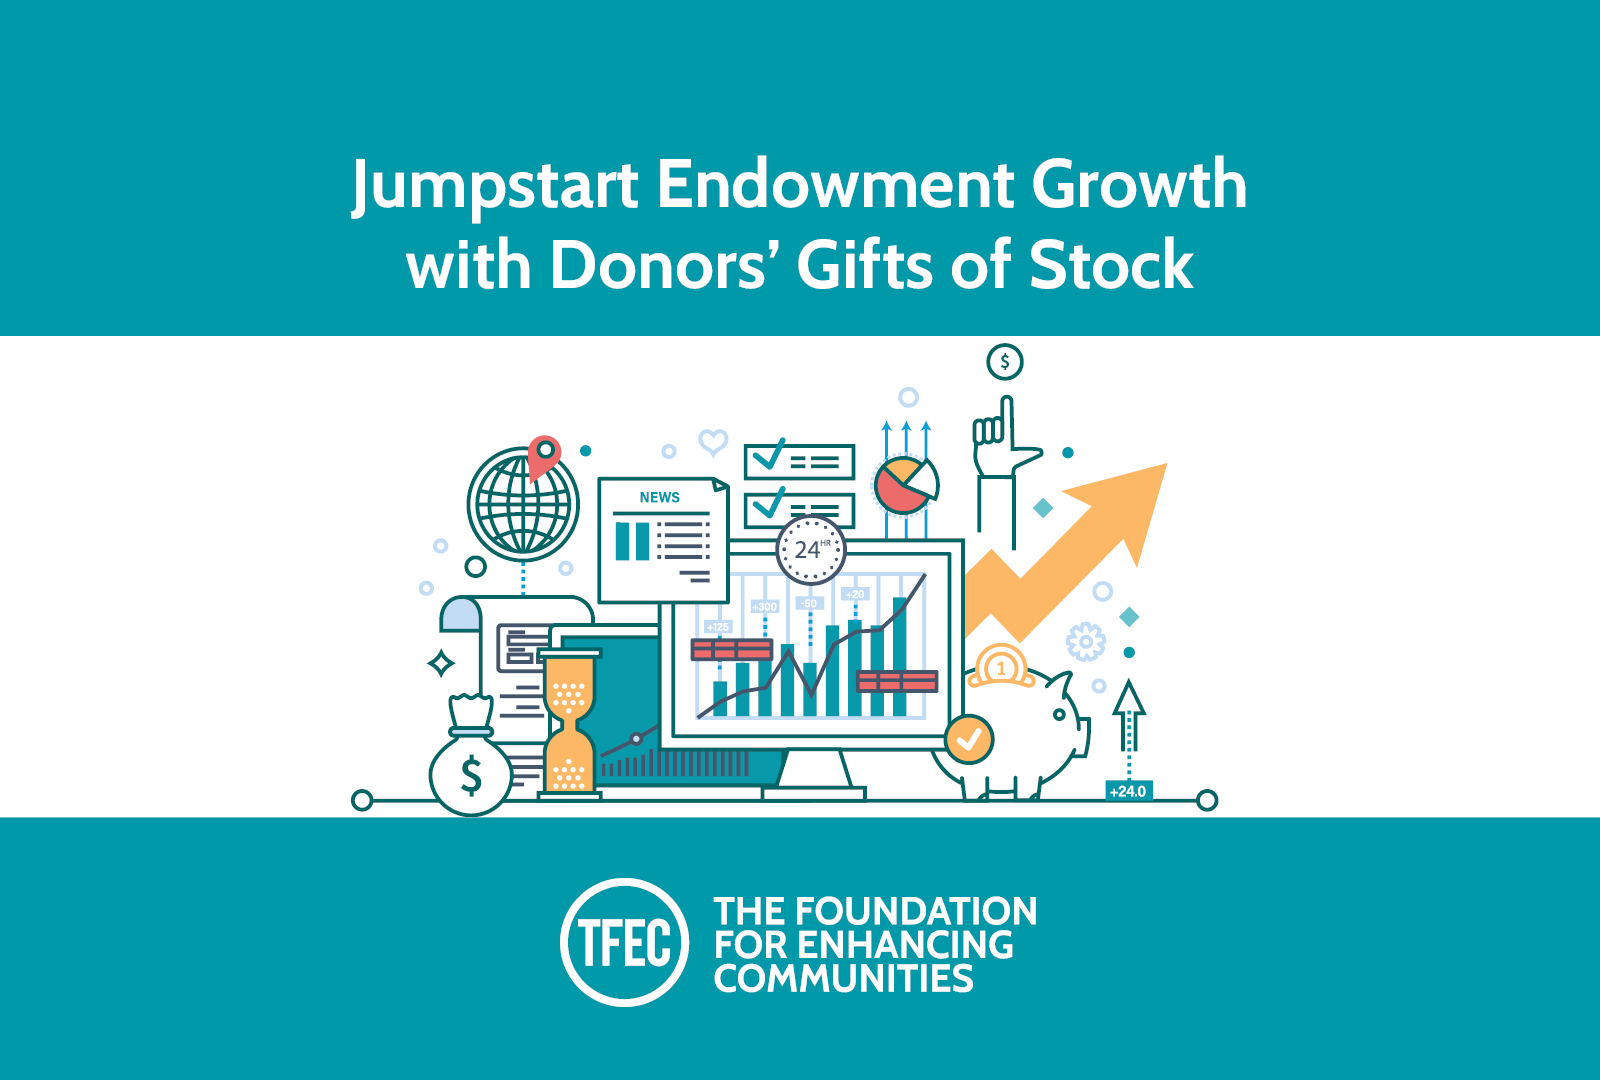 Jumpstart Endowment Growth with Donors’ Gifts of Stock